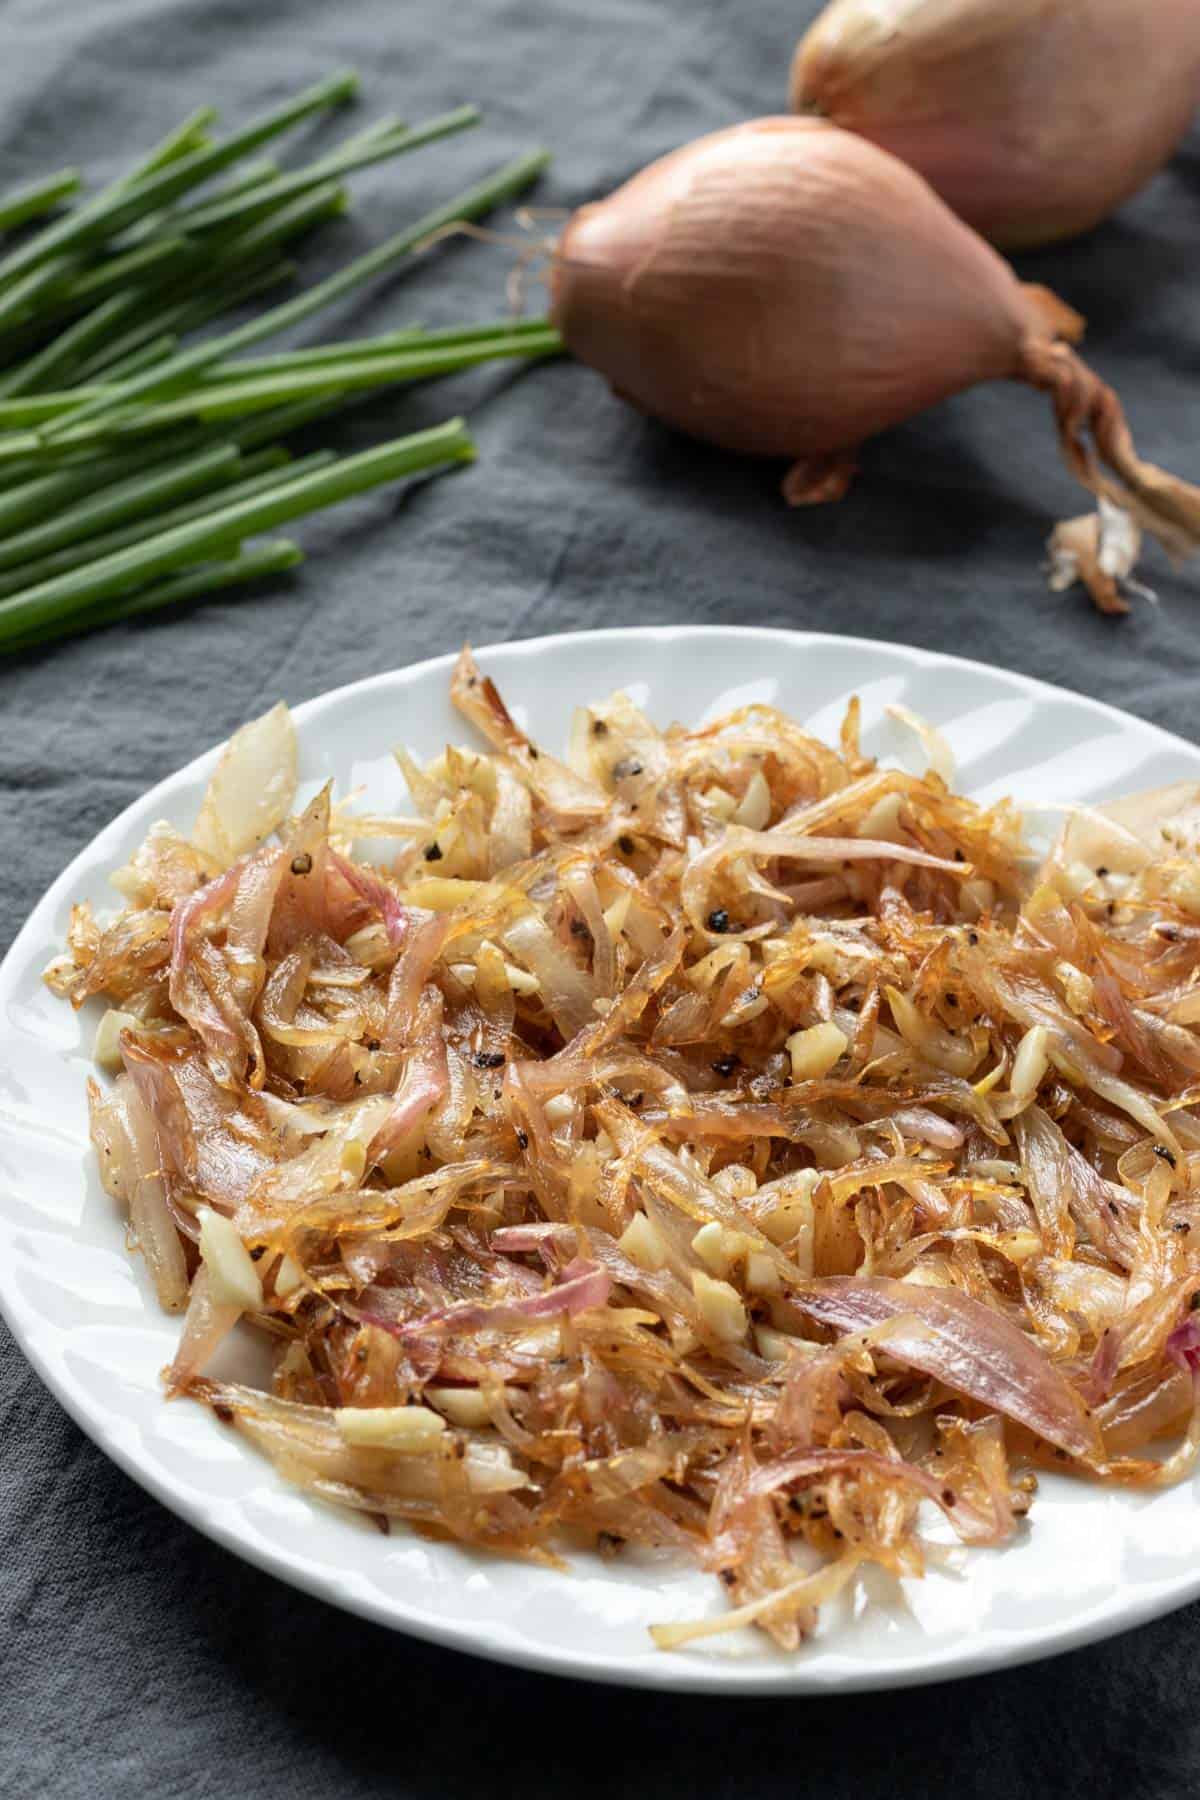 Tender, caramelized shallot and onion cooling on a plate.